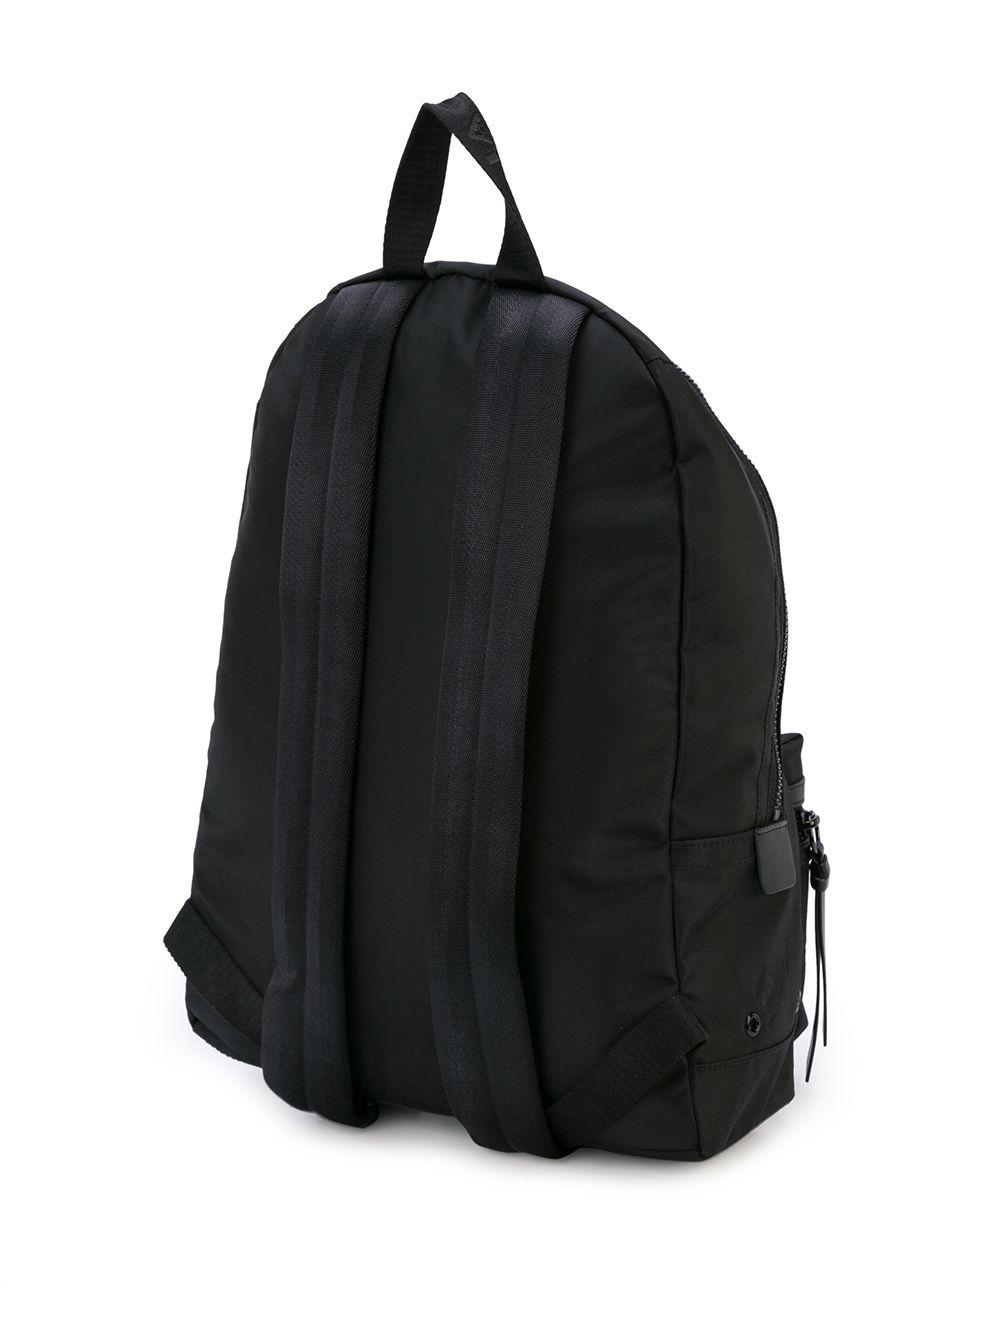 Marc Jacobs The Large Backpack in Black - Lyst